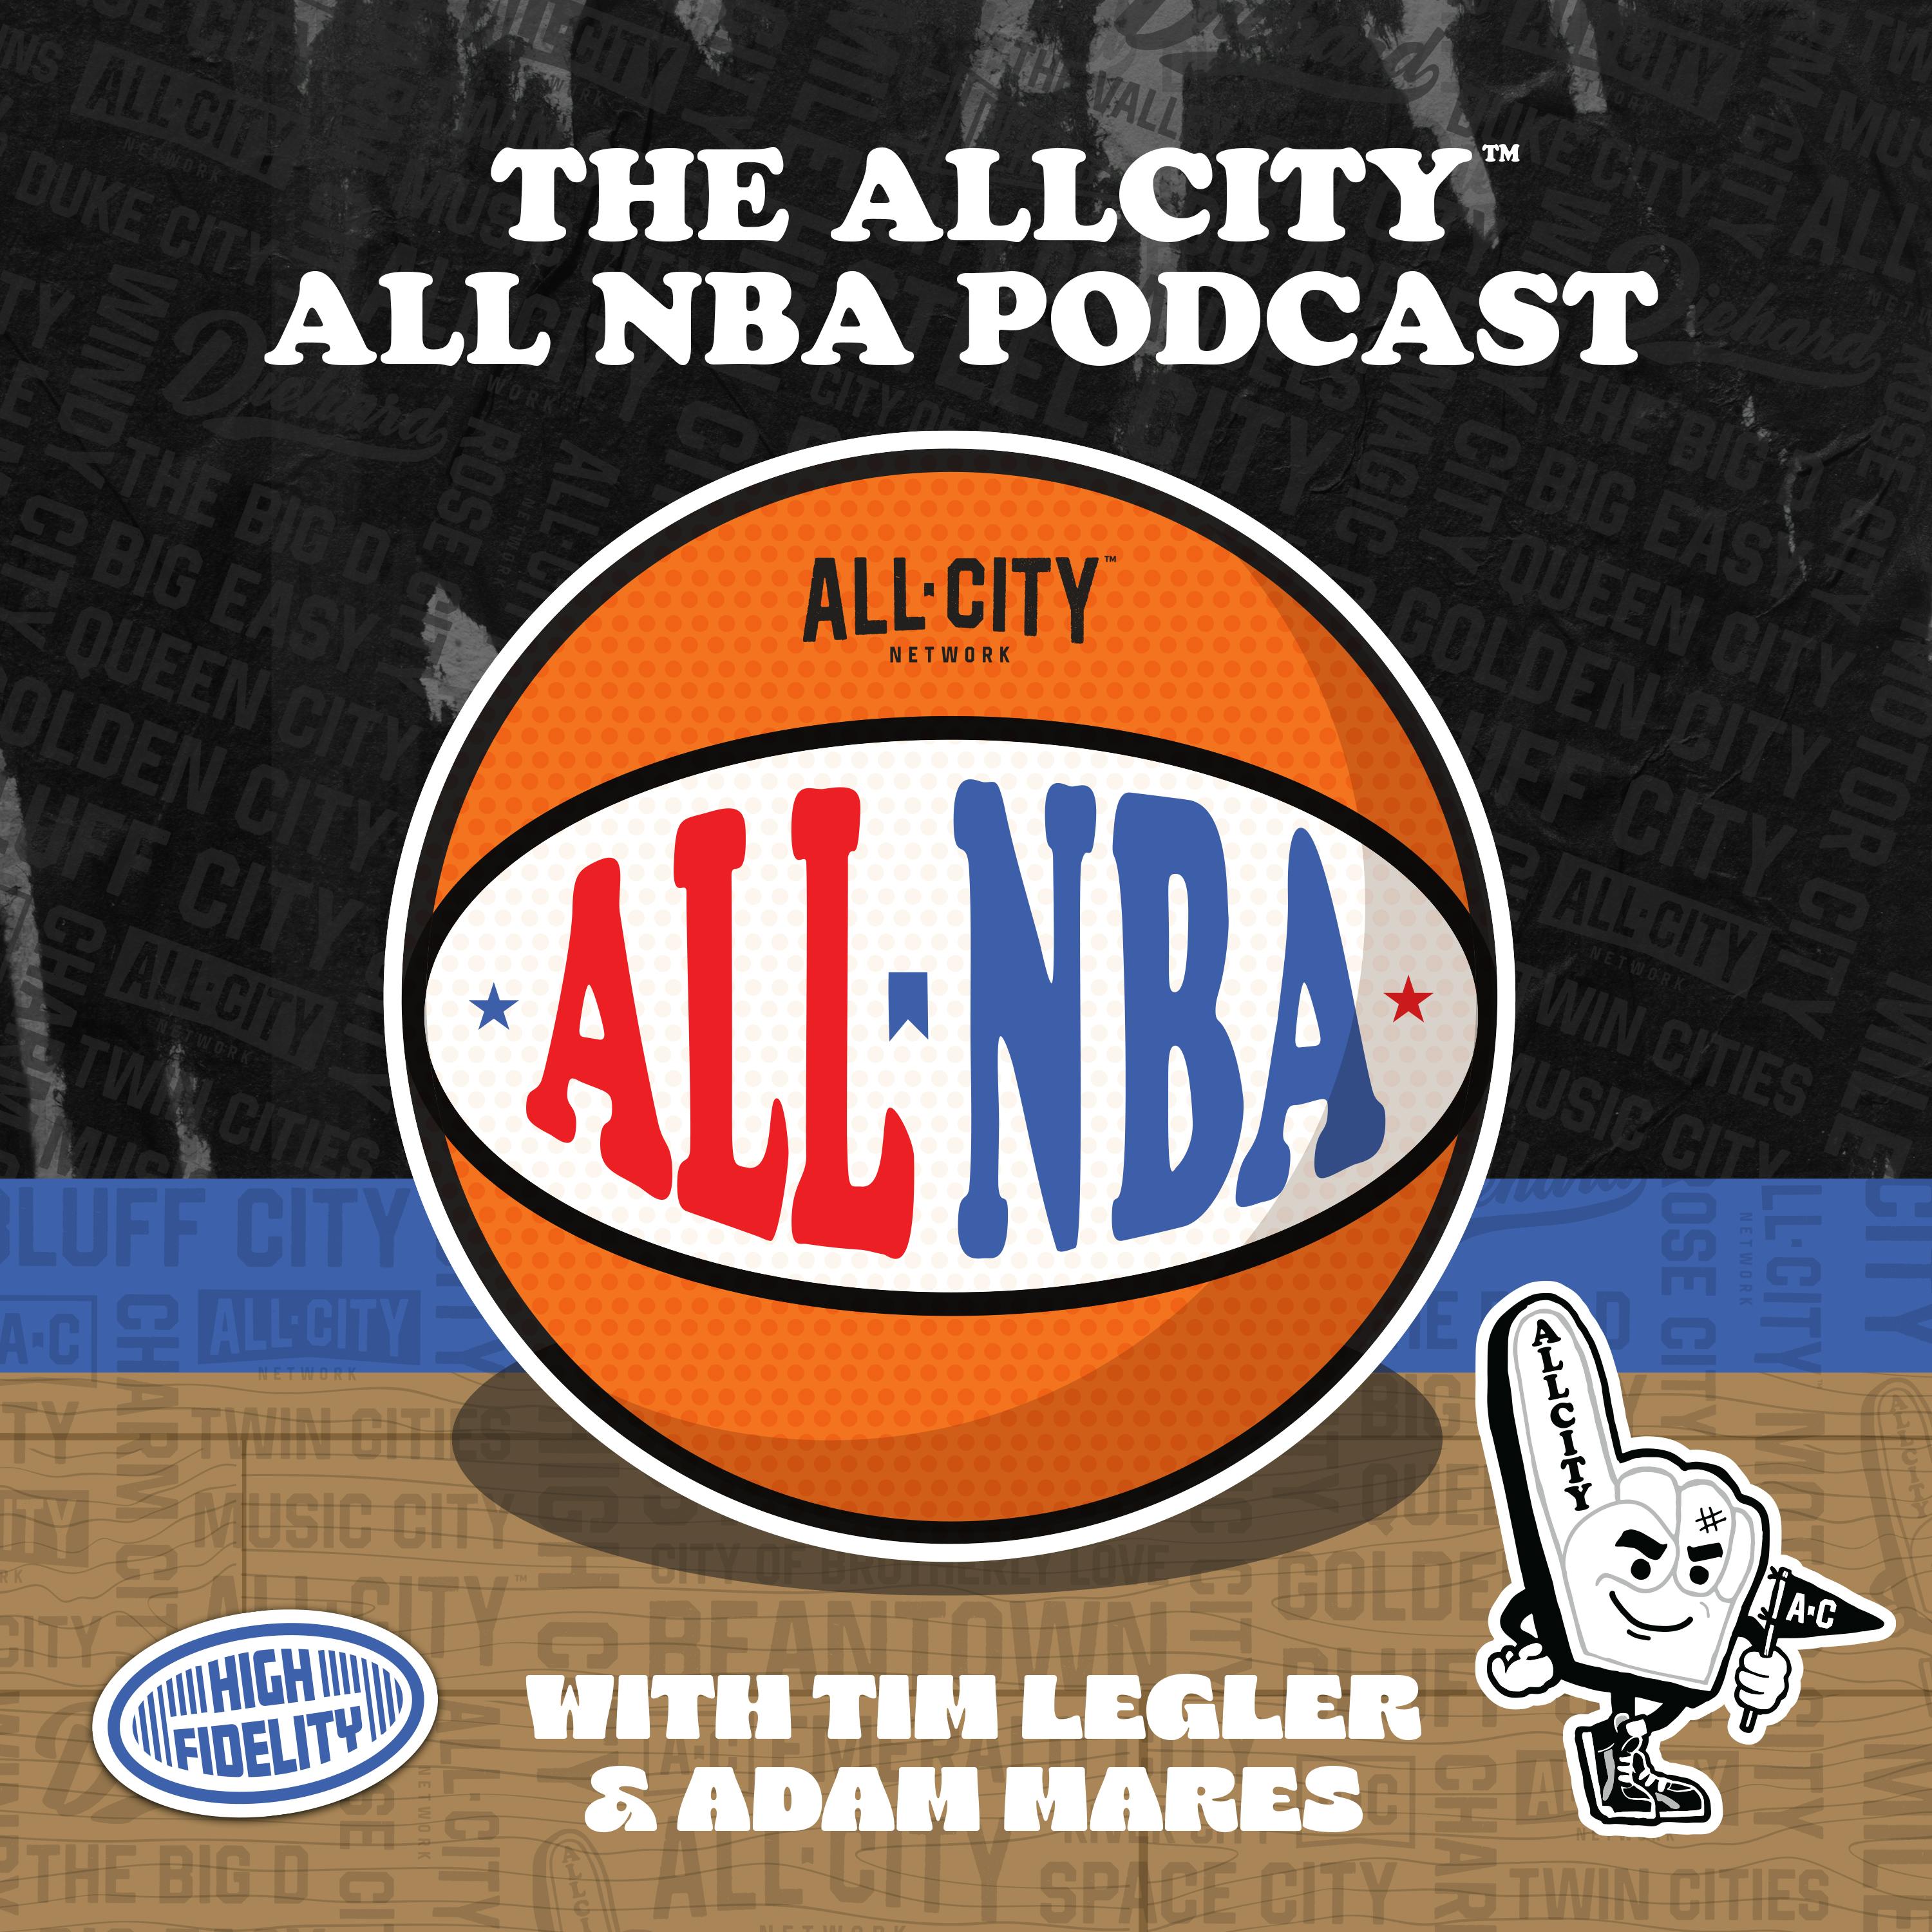 The ALL NBA Podcast: What we’ve learned about Jayson Tatum and the Boston Celtics since the all-star break